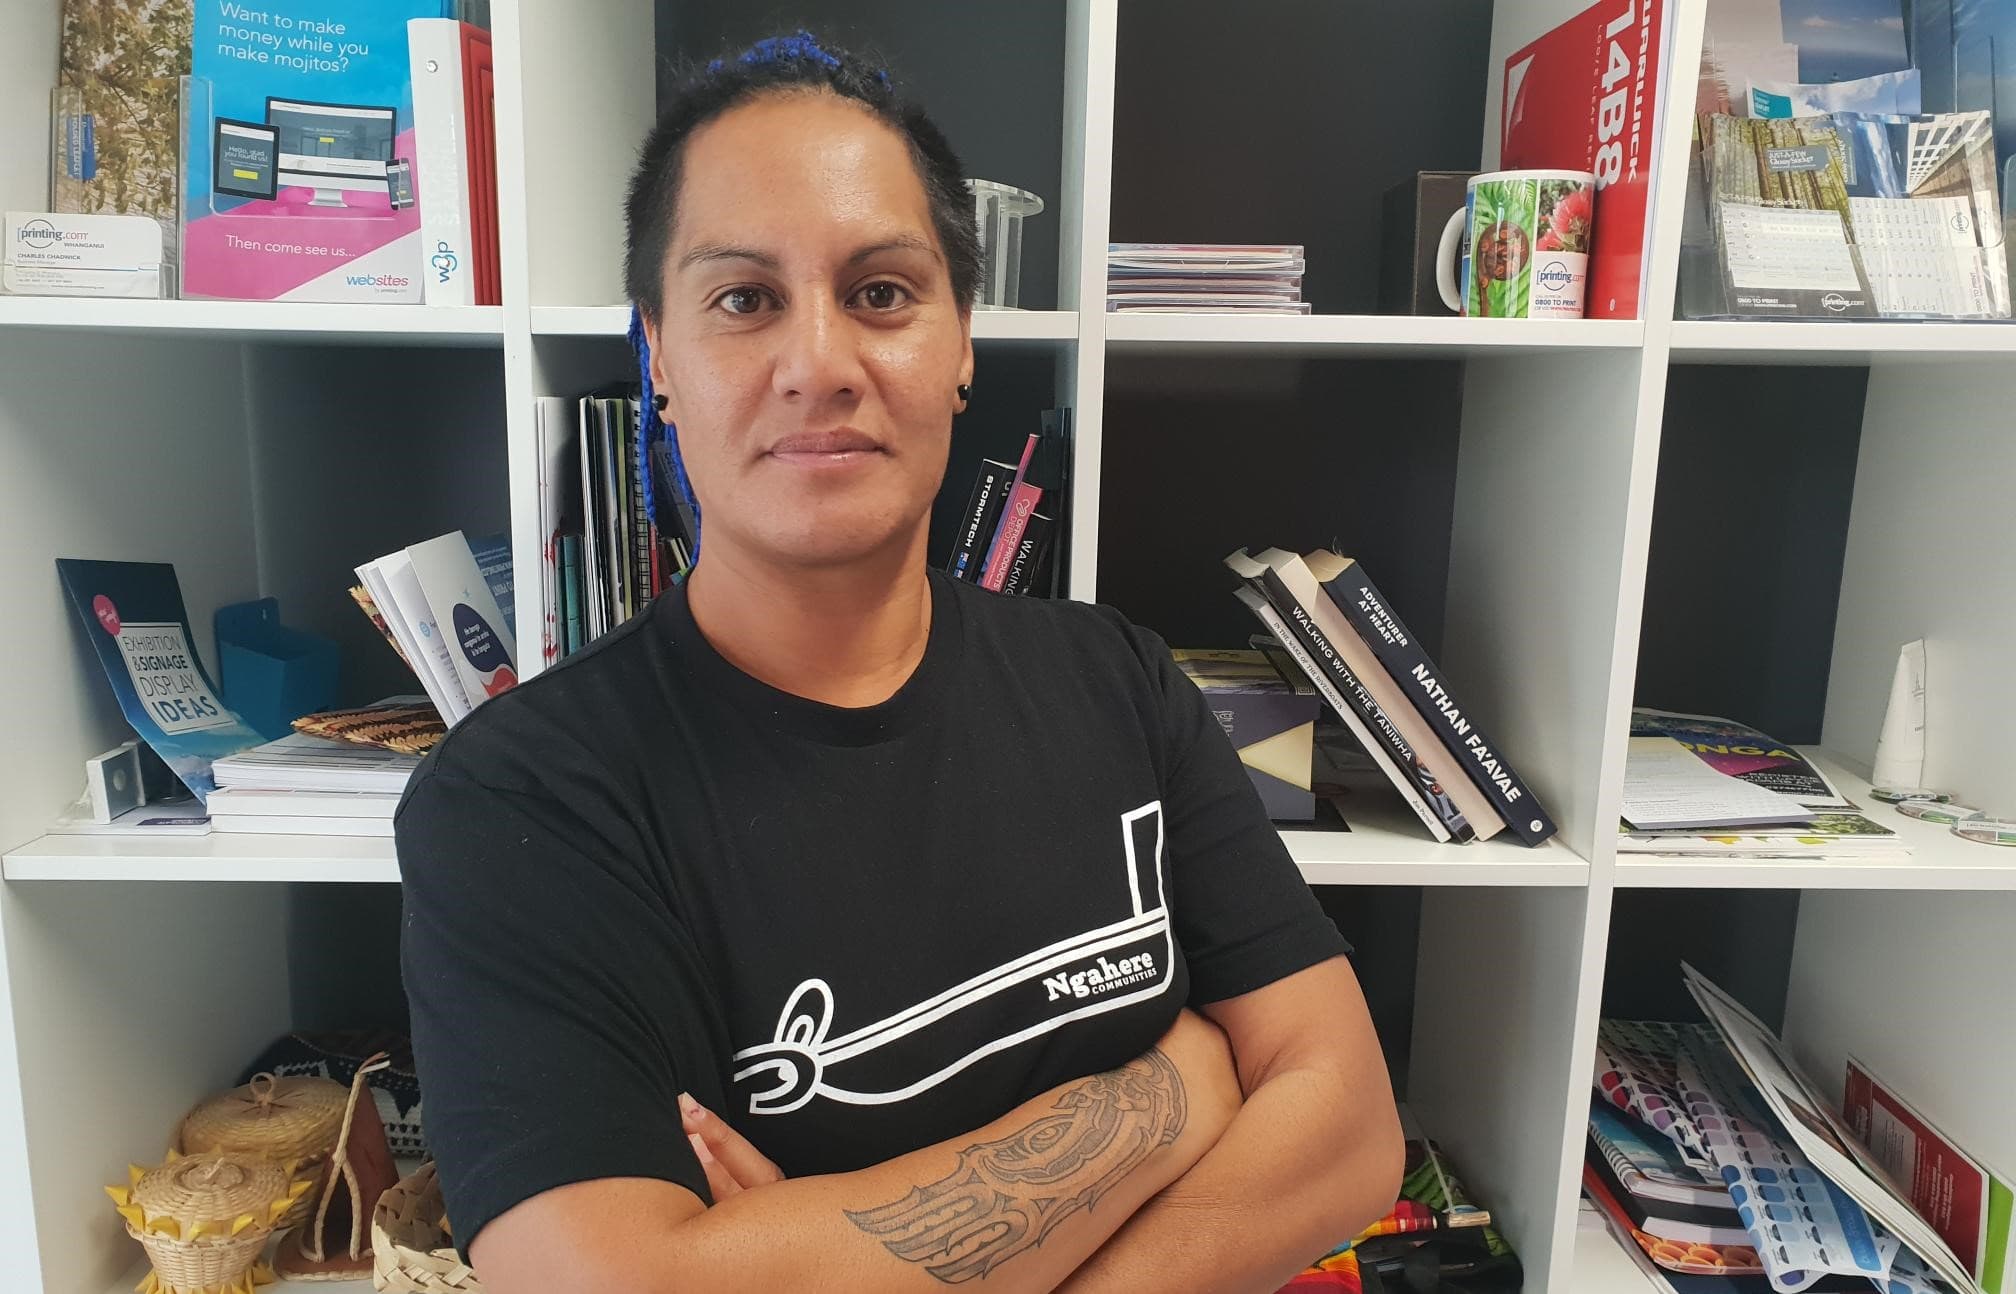 Tammy Potini sees Māori business as a form of self-determination, or mana motuhake - and hopes the Budget will reveal new spending to support Māori entrepreneurs.